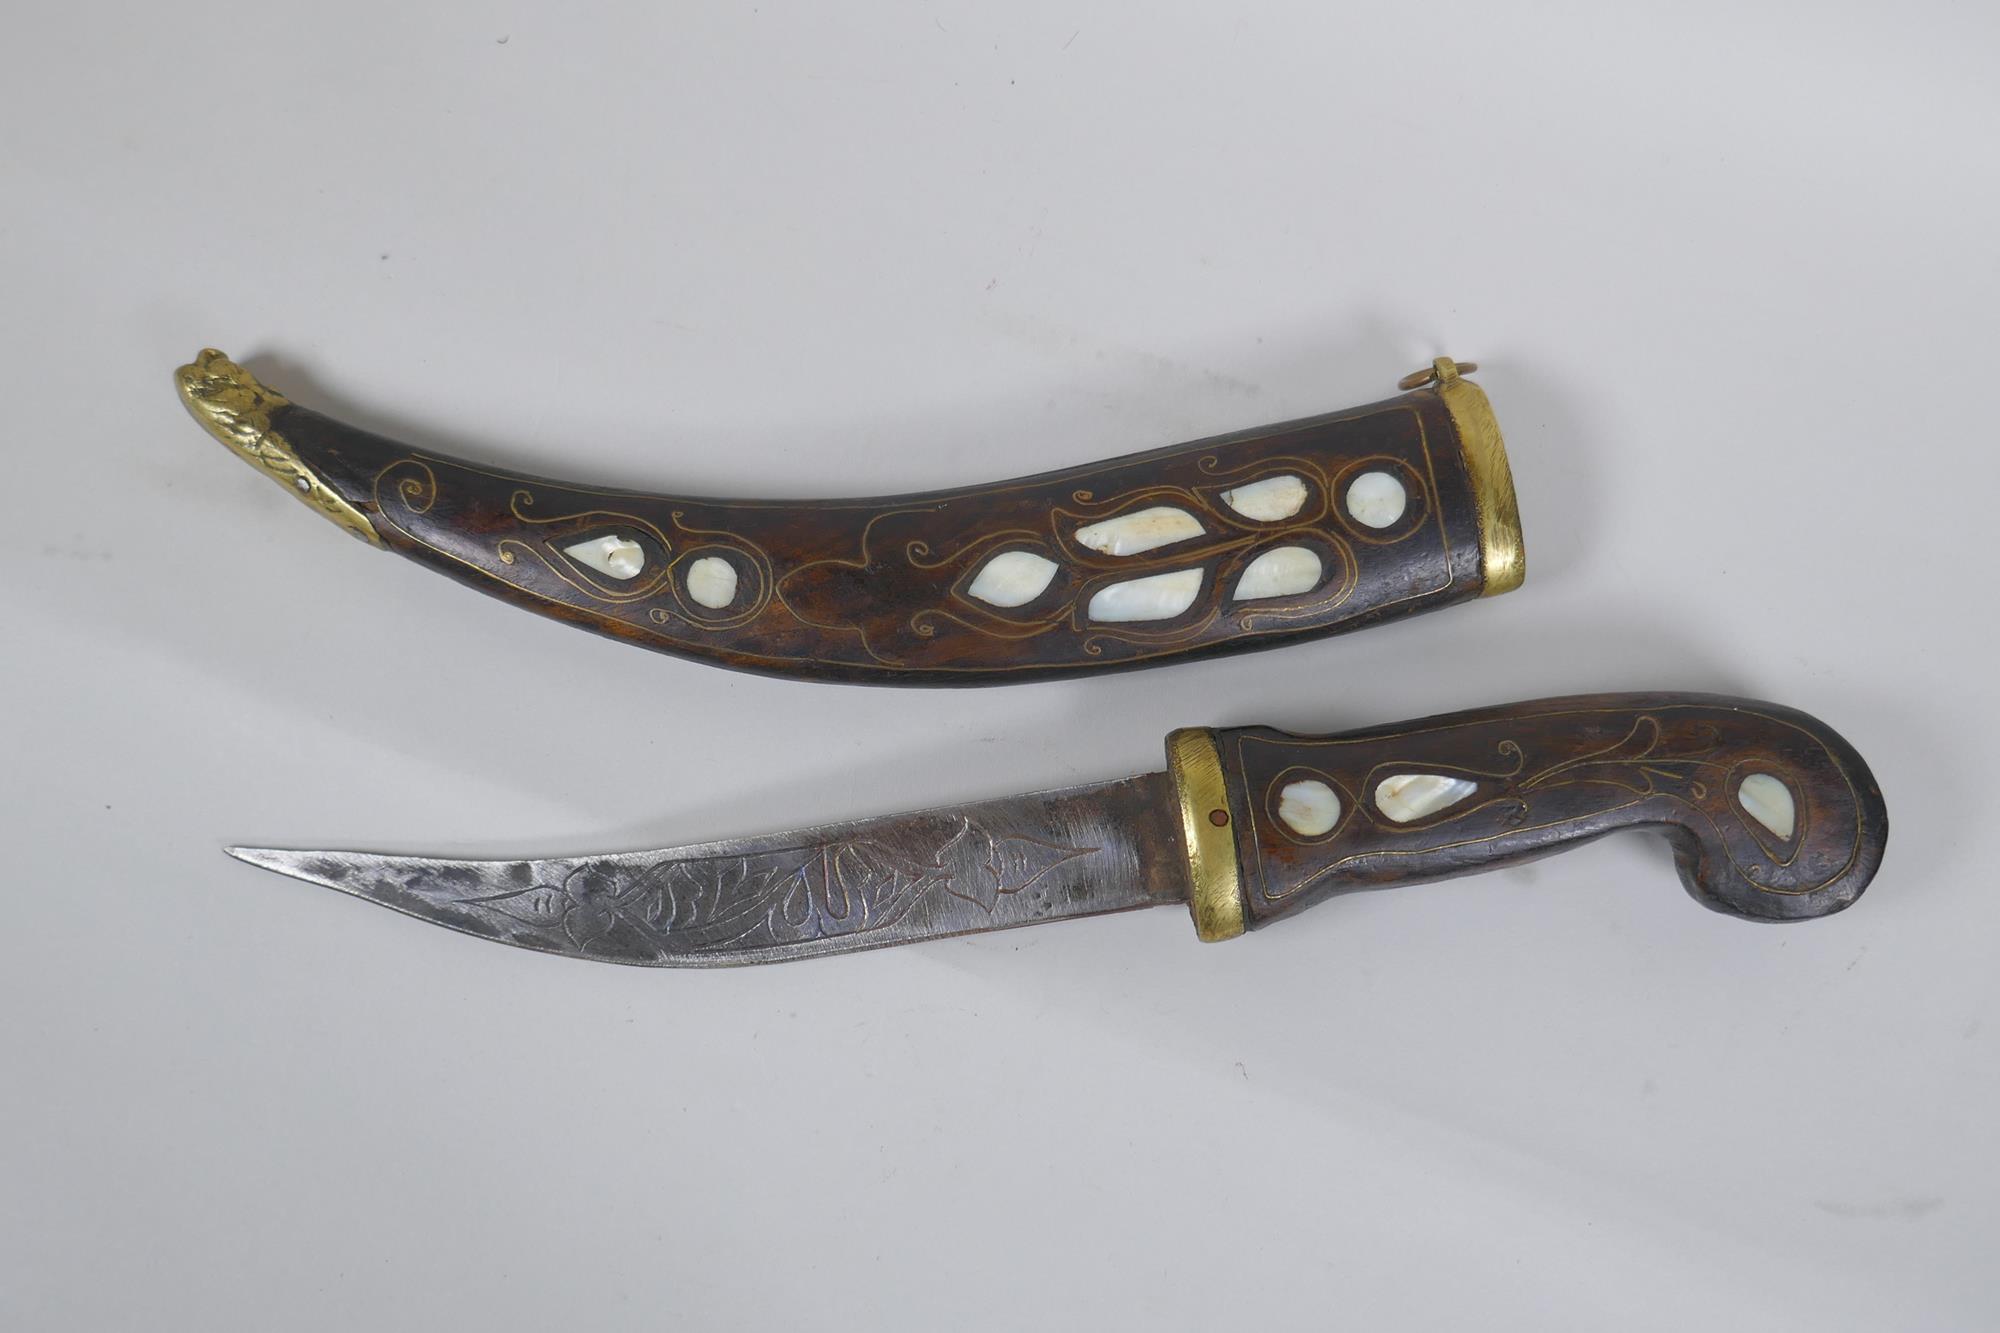 A Turkish dagger Jambiya, with mother of pearl inlaid wood handle and sheath, and brass mounts, - Image 2 of 5